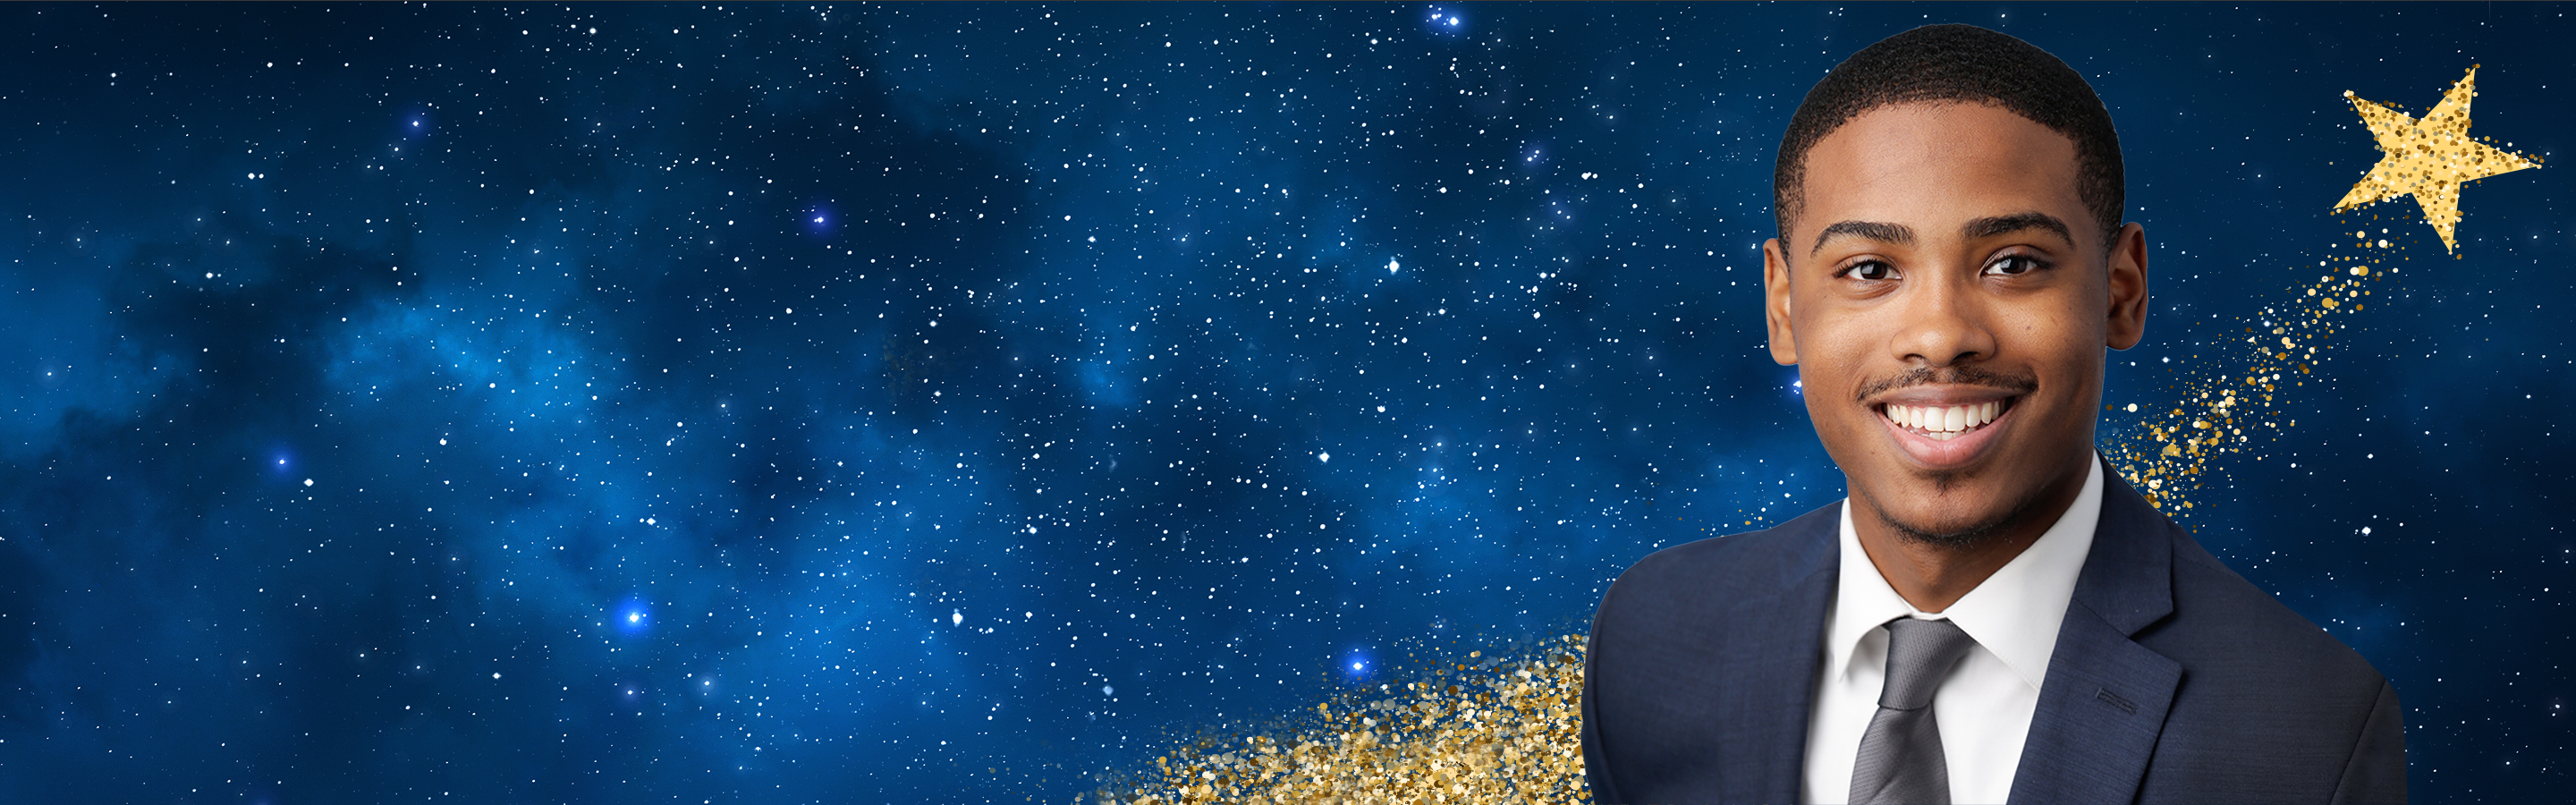 Headshot of Xavier Nonez over the image of a starry sky with a gold shooting star